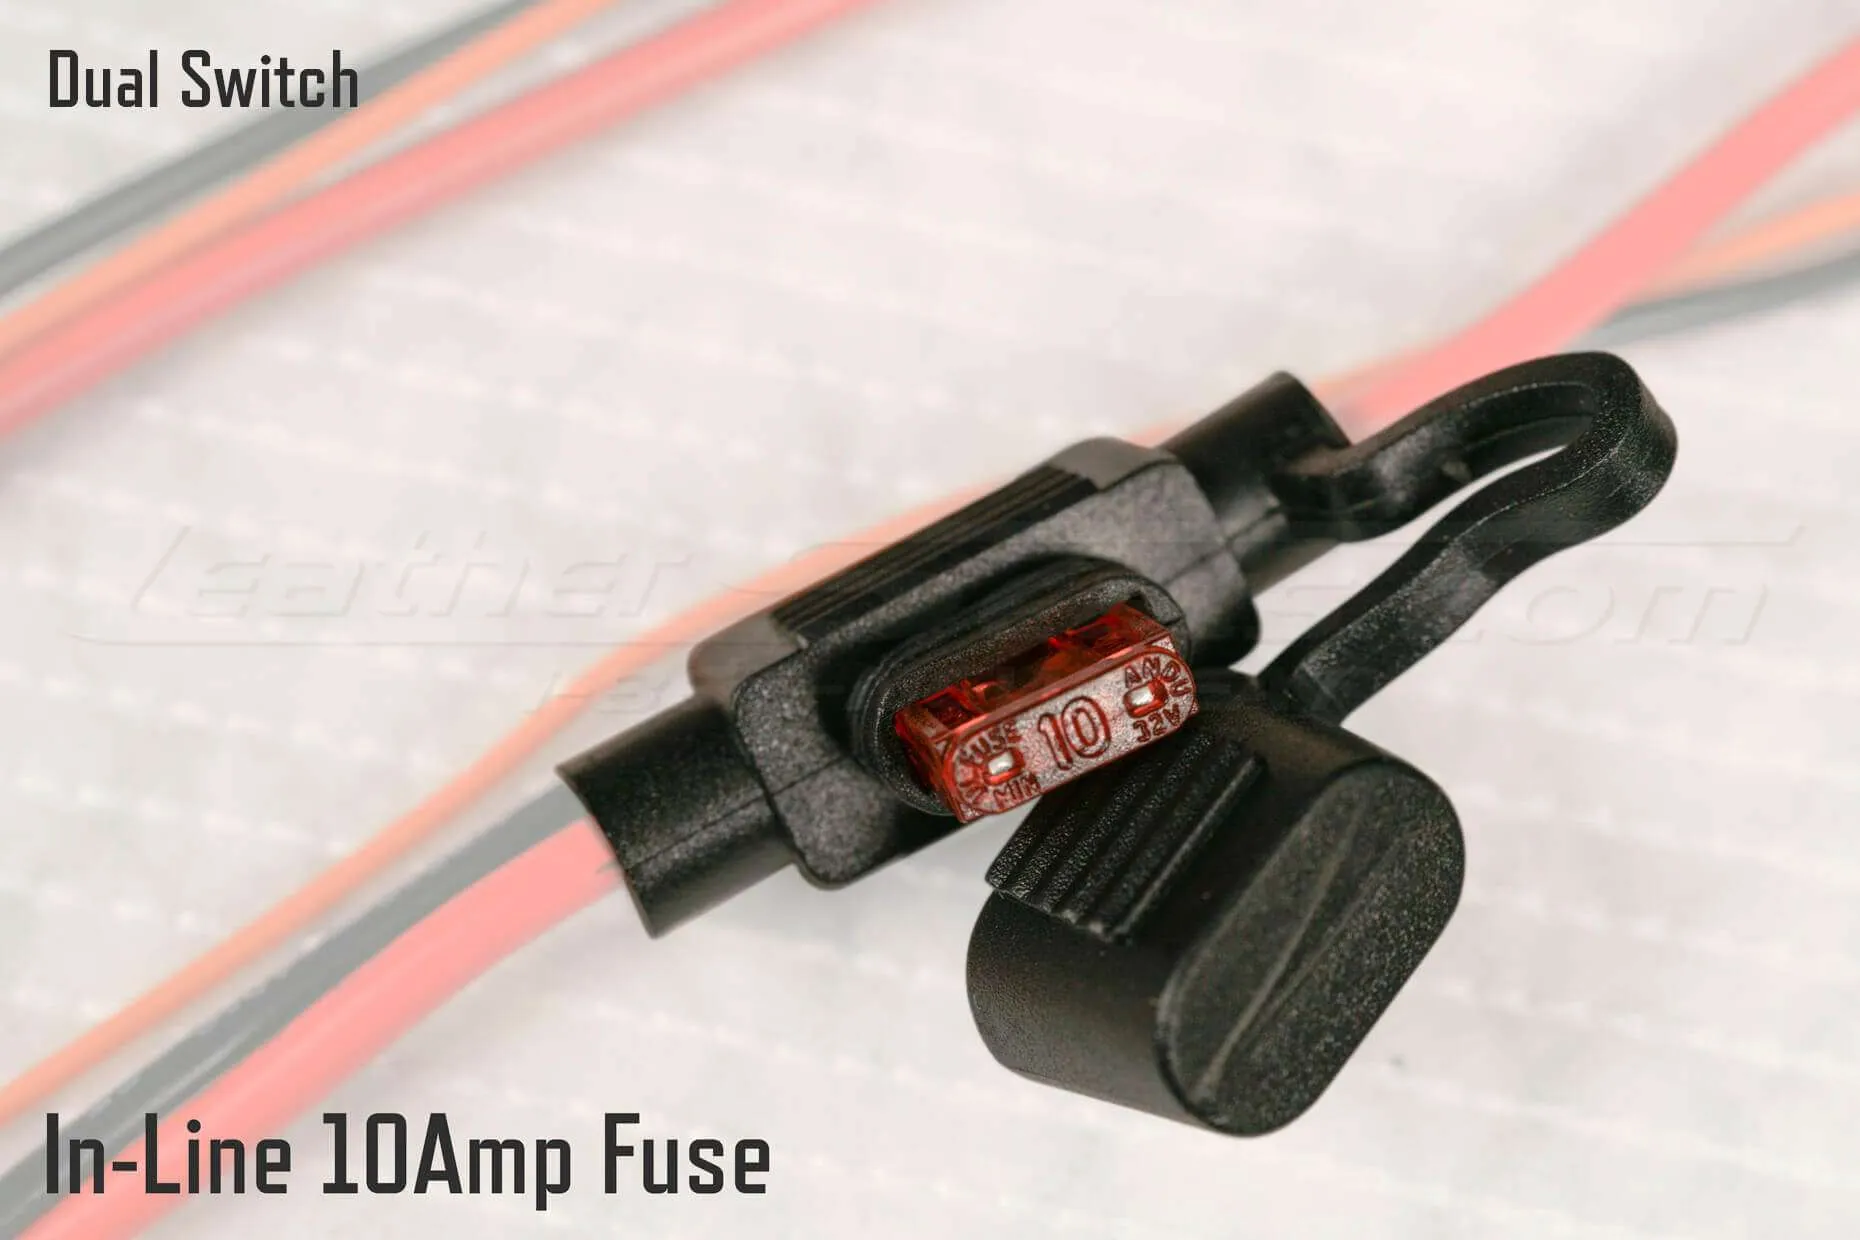 Dual Switch In-Line 10Amp Fuse